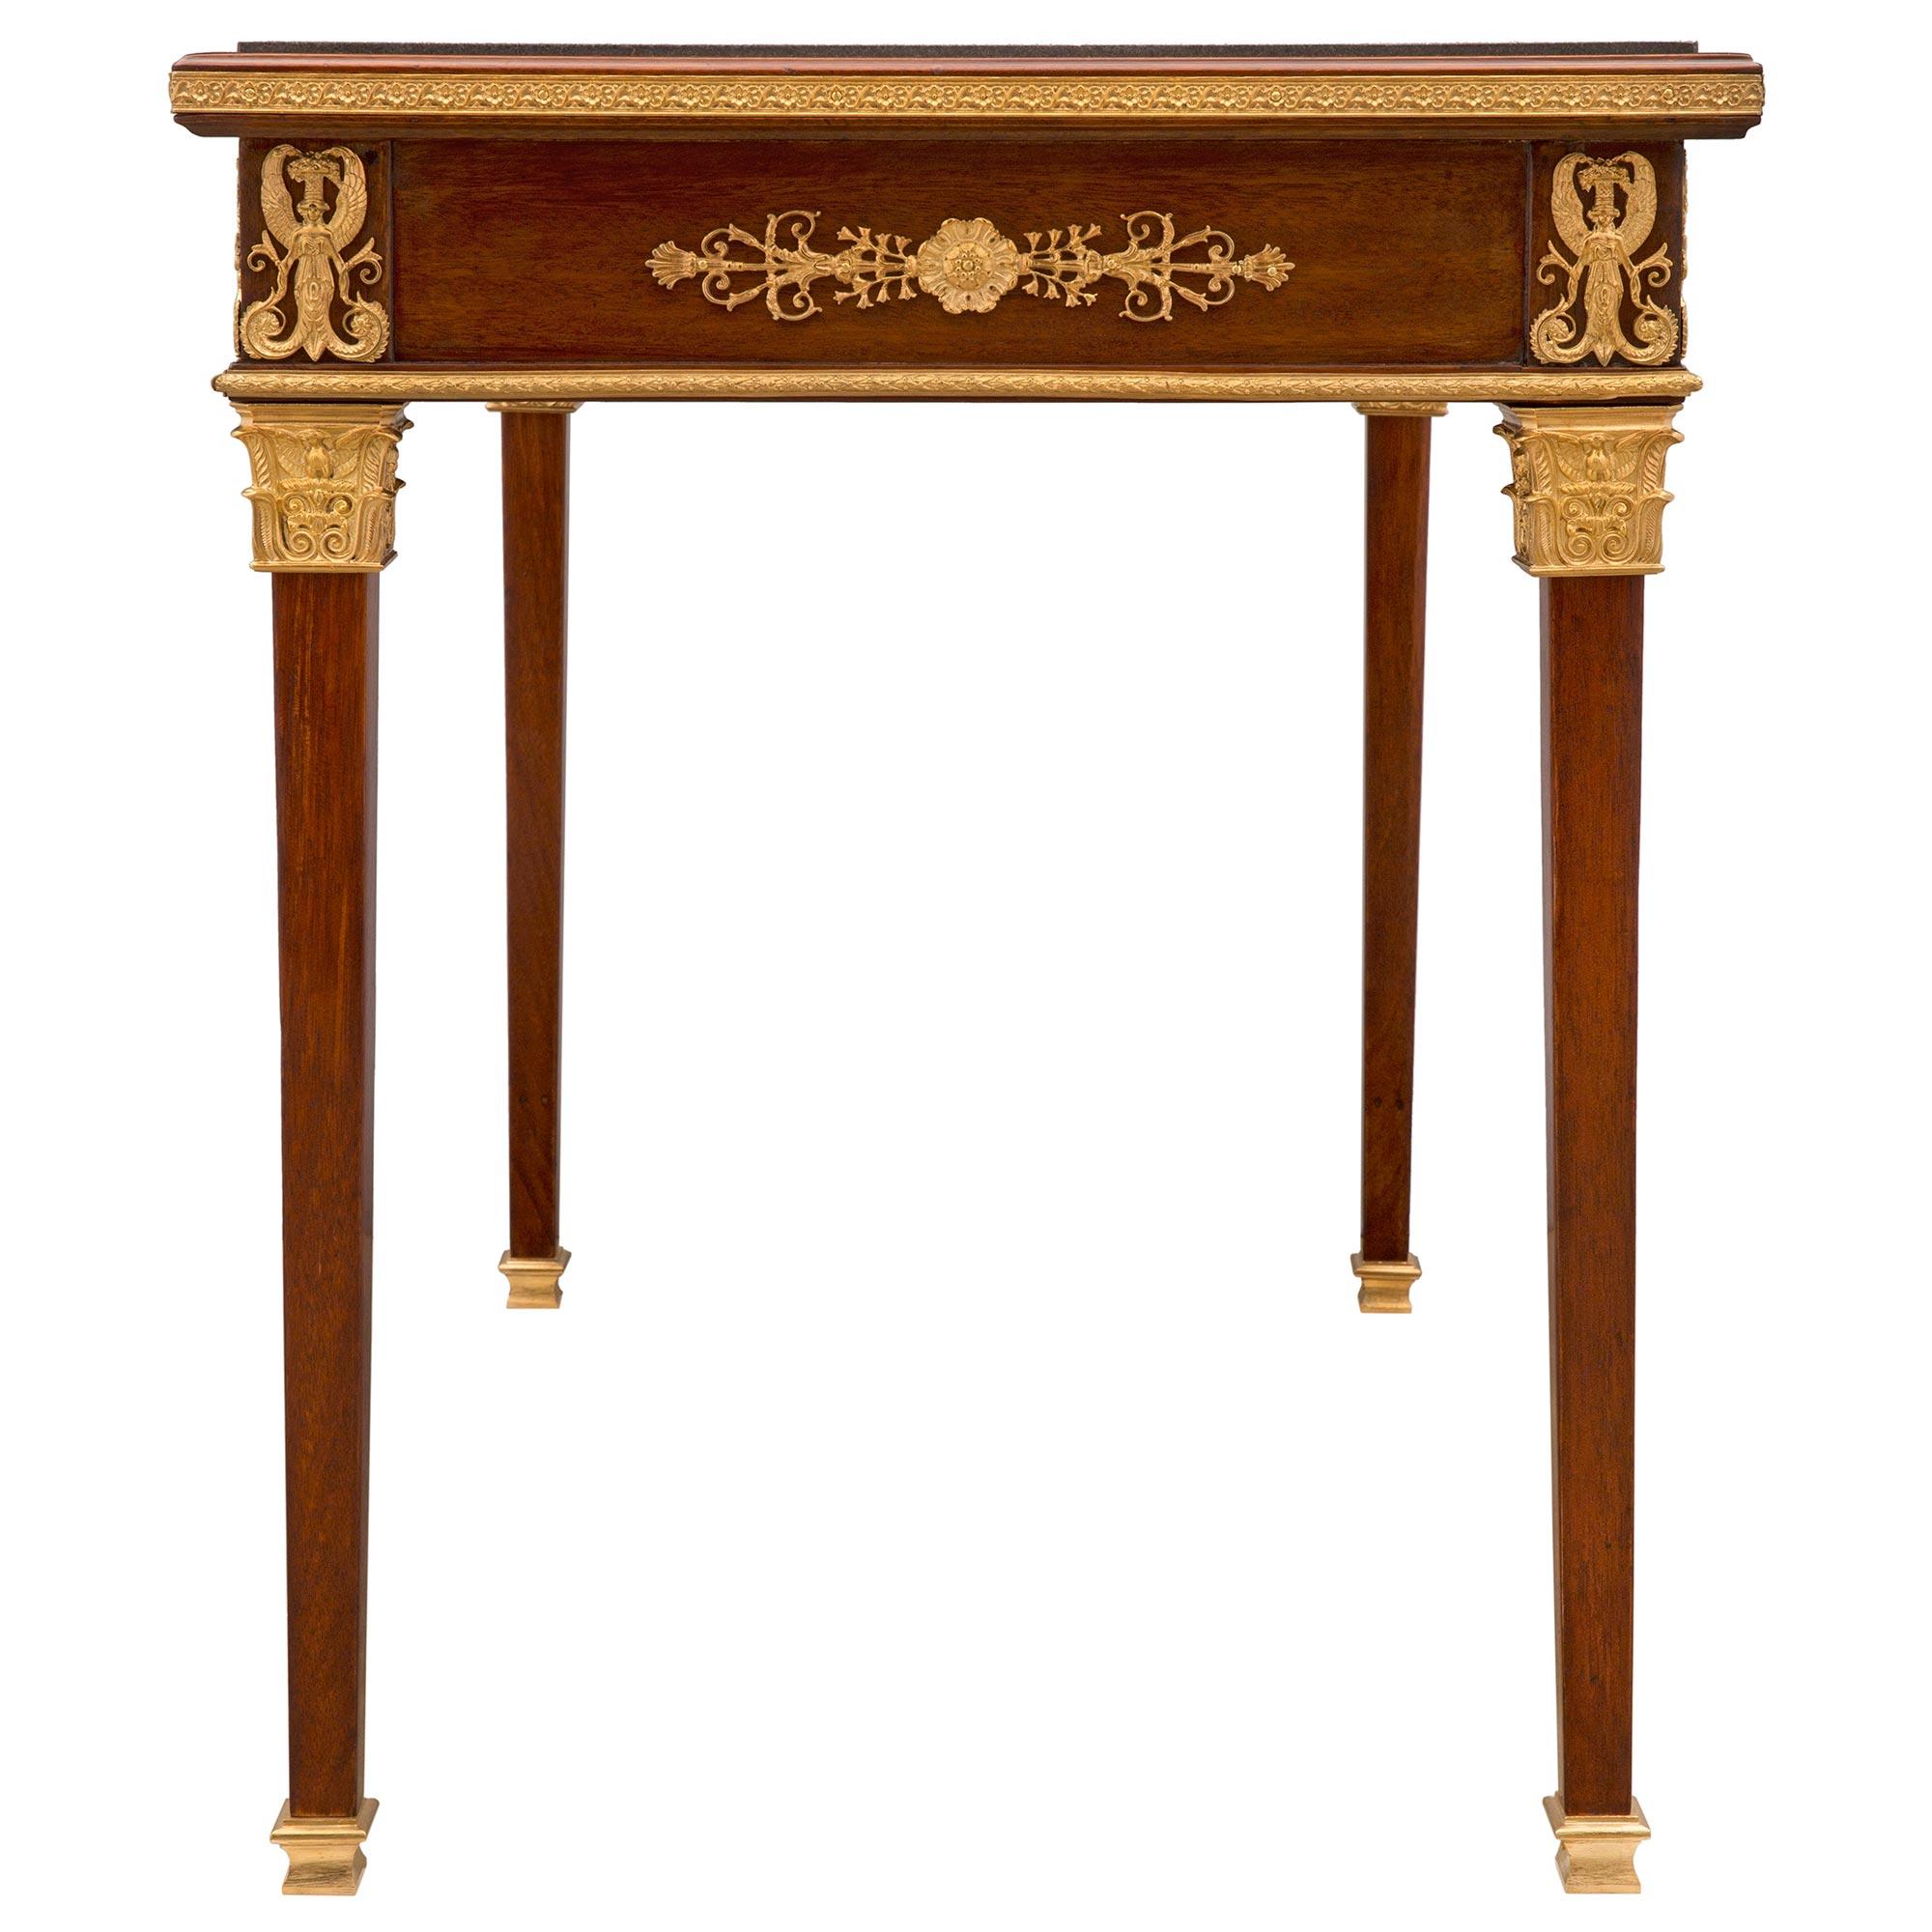 French 19th Century Neoclassical Style Mahogany, Ormolu and Slate Table/Desk For Sale 2